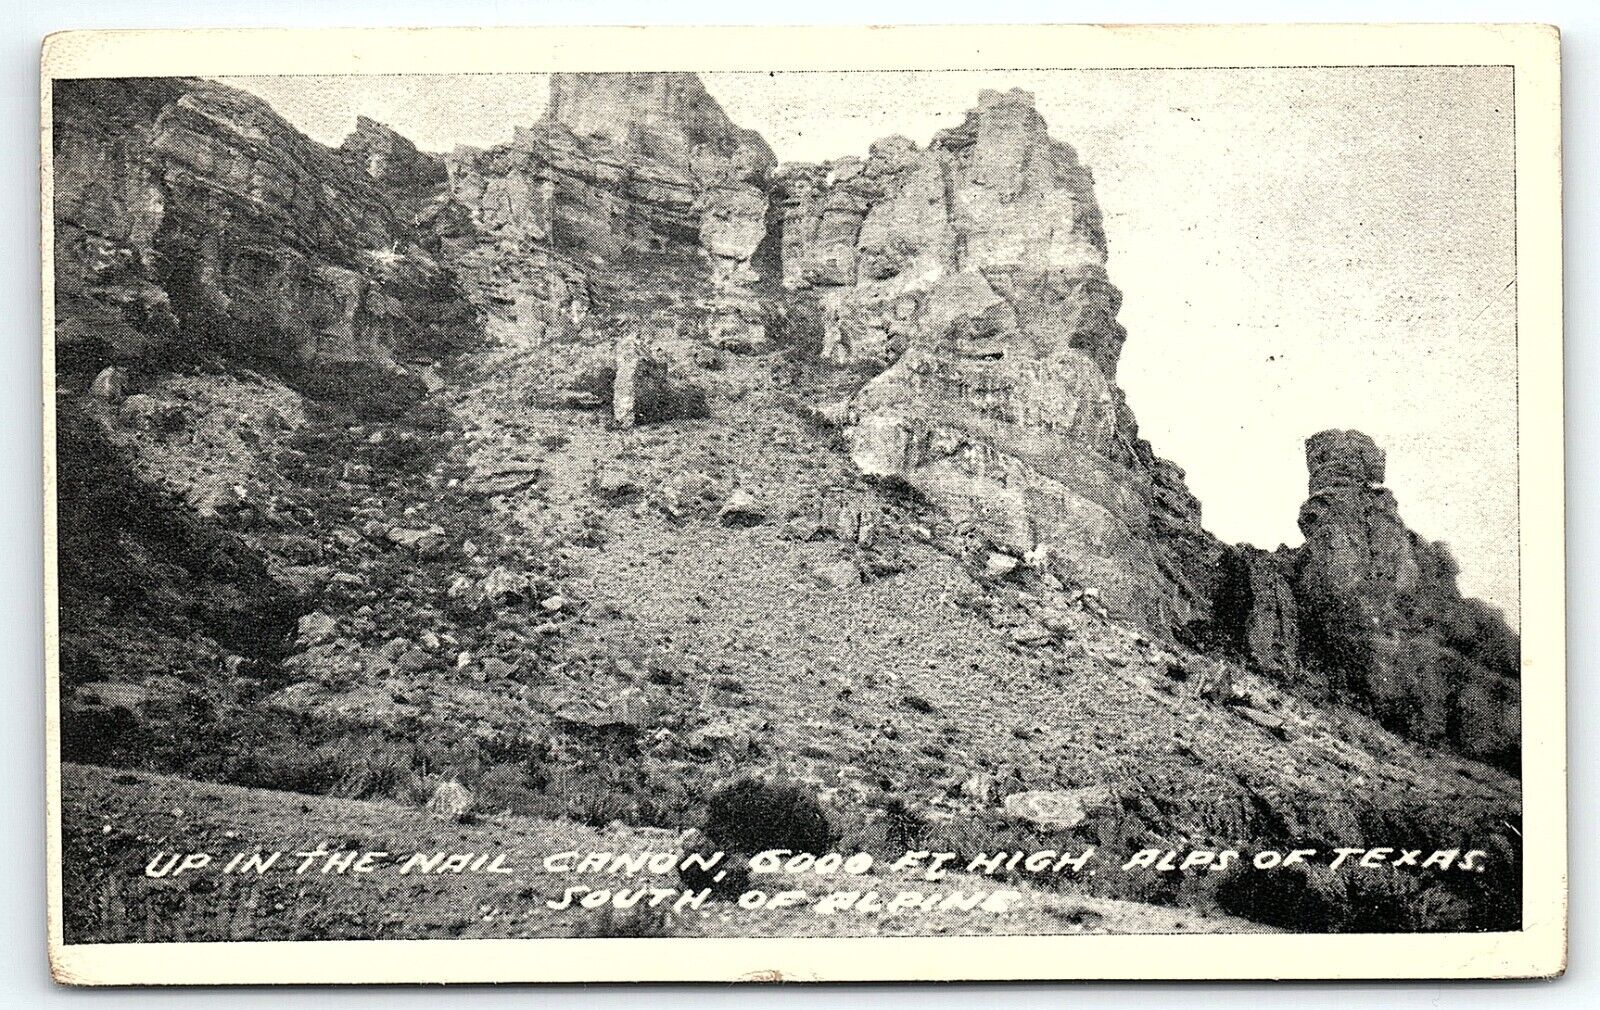 1927 ALPINE TX ALPS OF TEXAS UP IN THE NAIL CANON DRUG STORE POSTCARD P3563